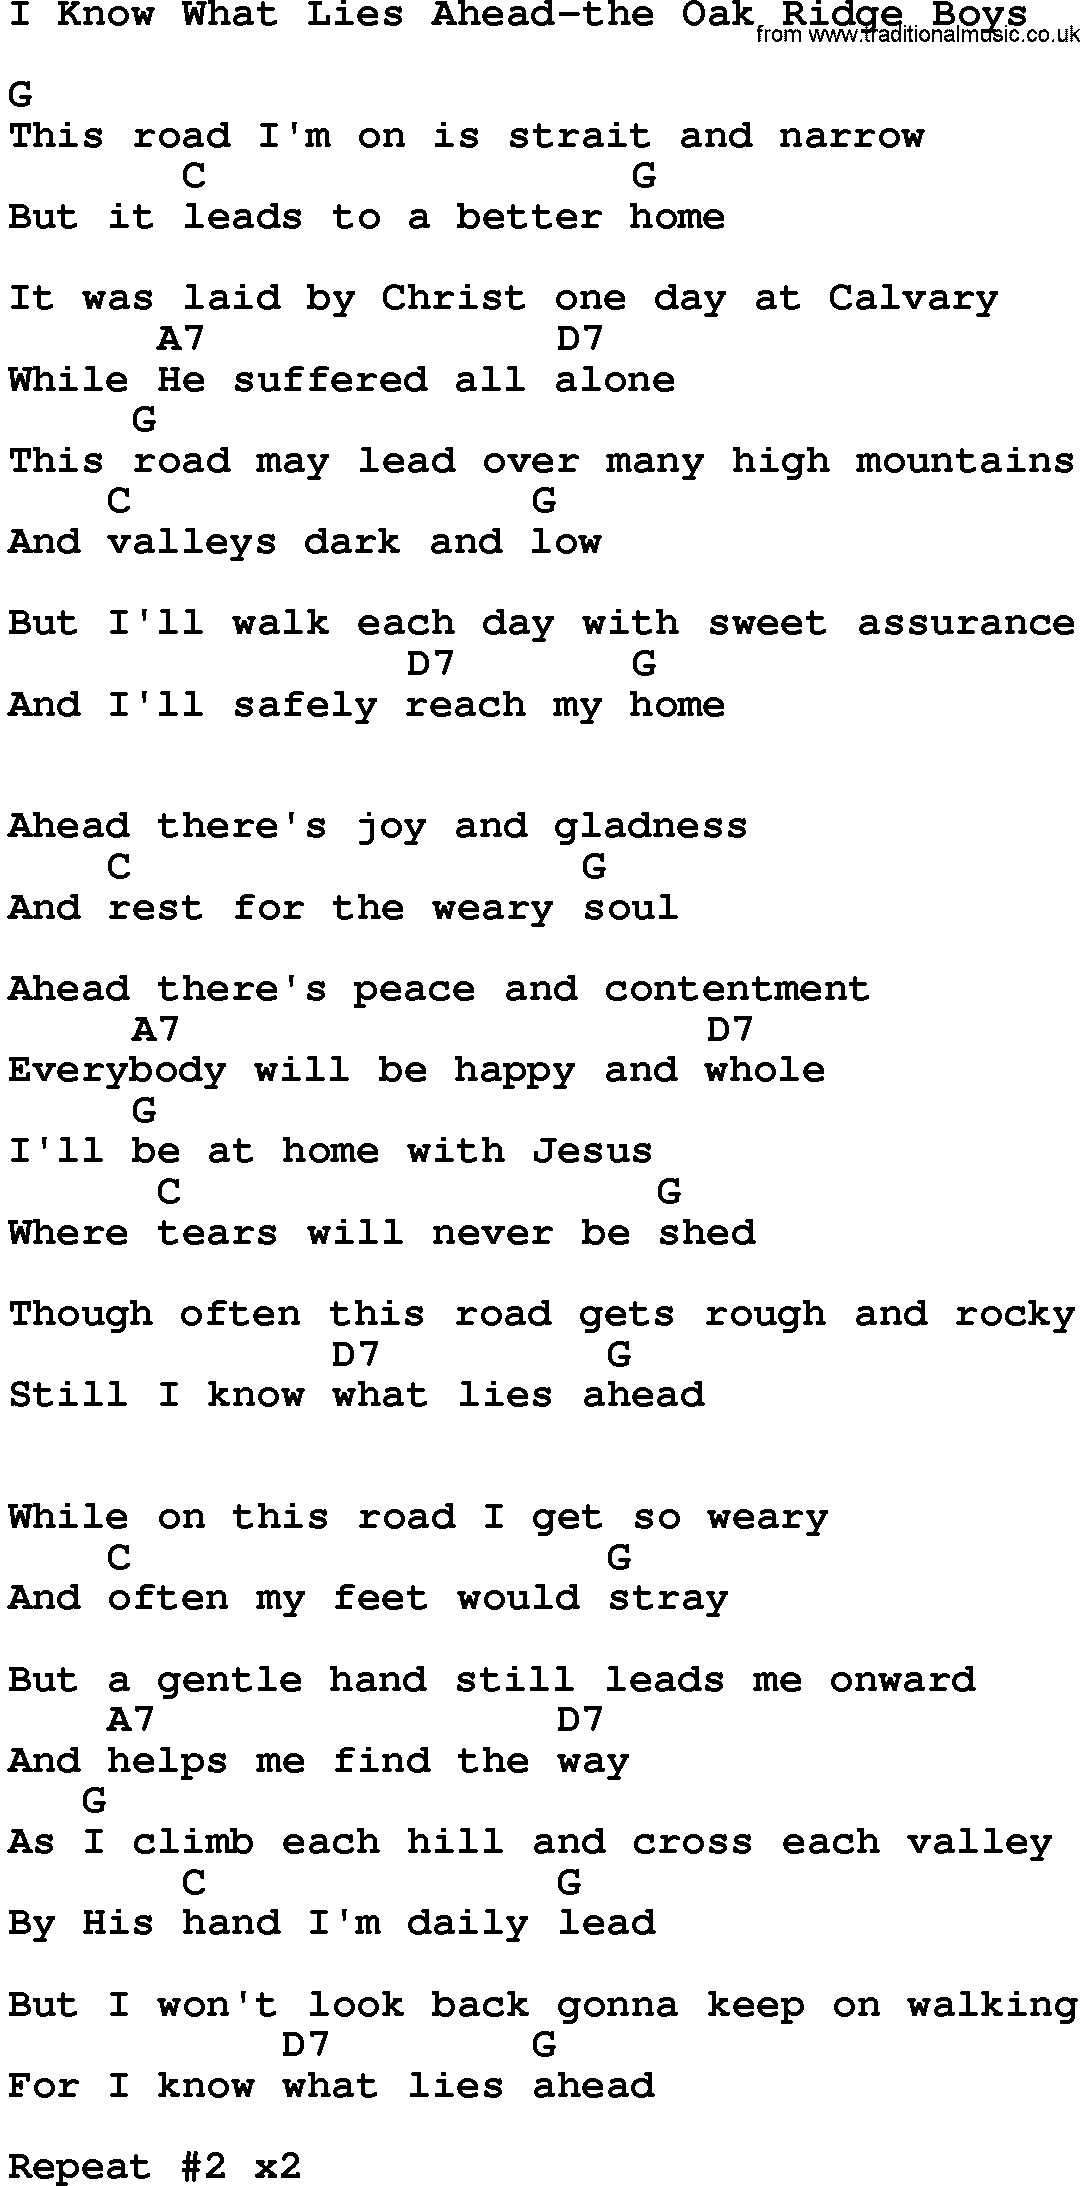 Country music song: I Know What Lies Ahead-The Oak Ridge Boys lyrics and chords